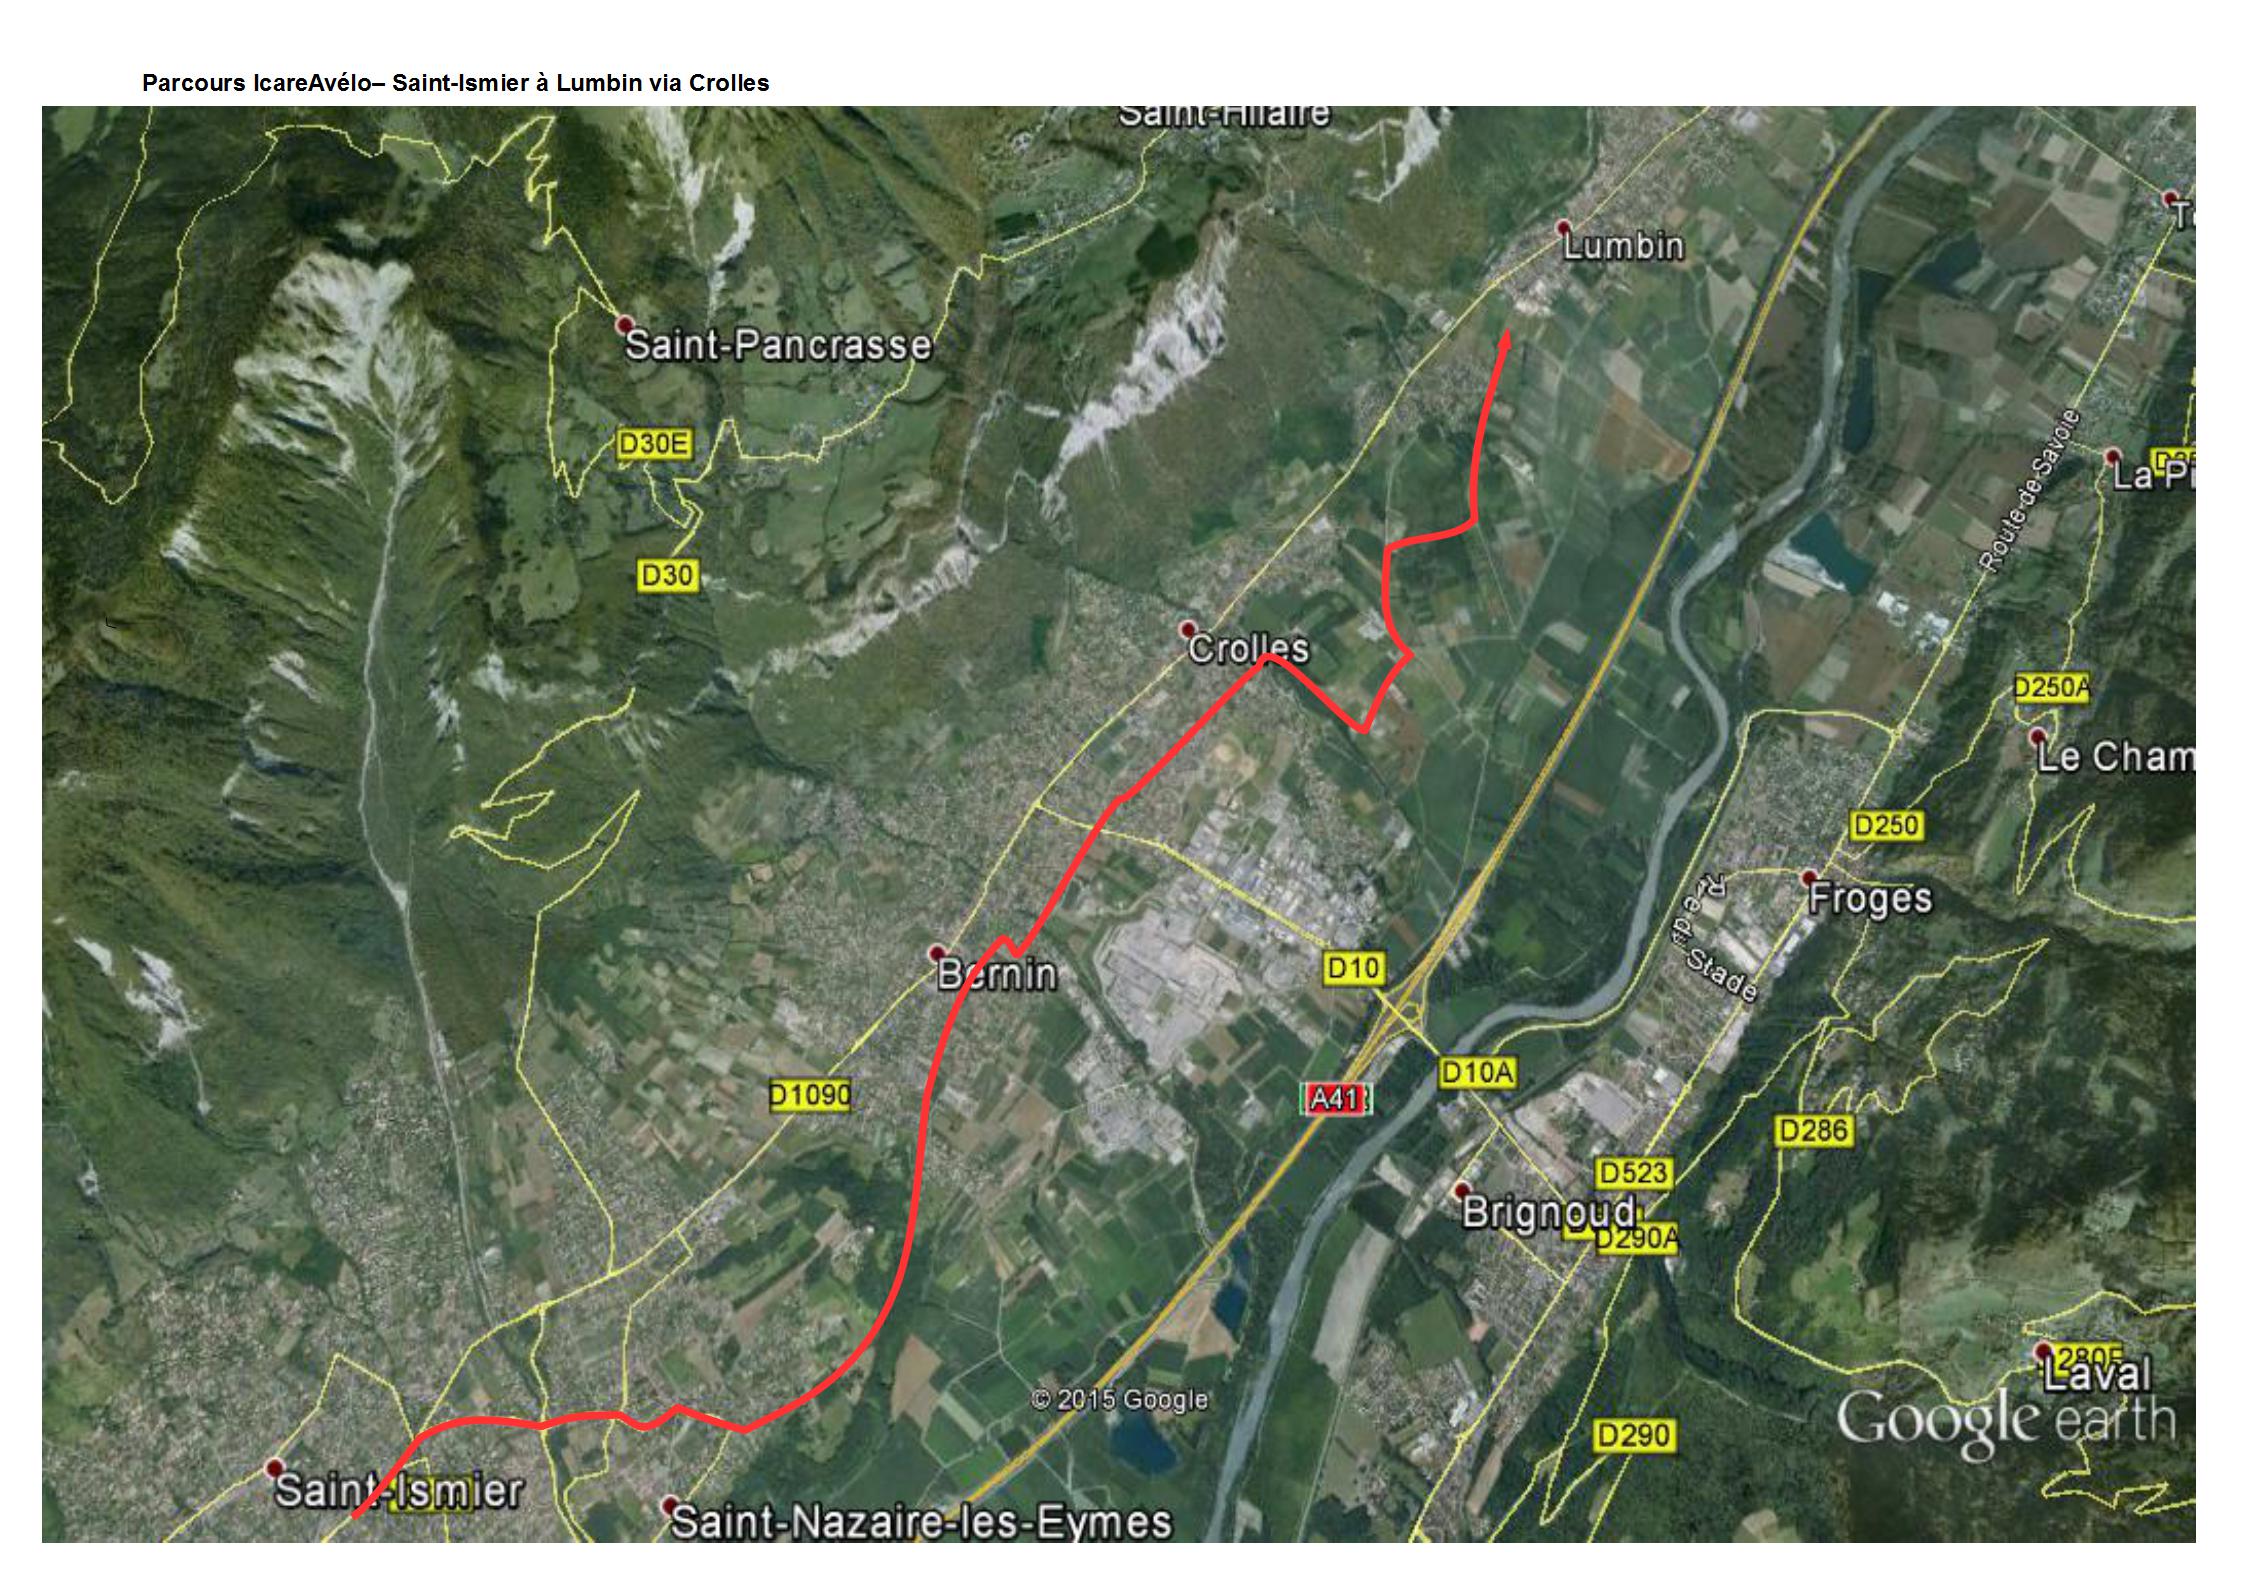 parcours_icareavelo.jpg